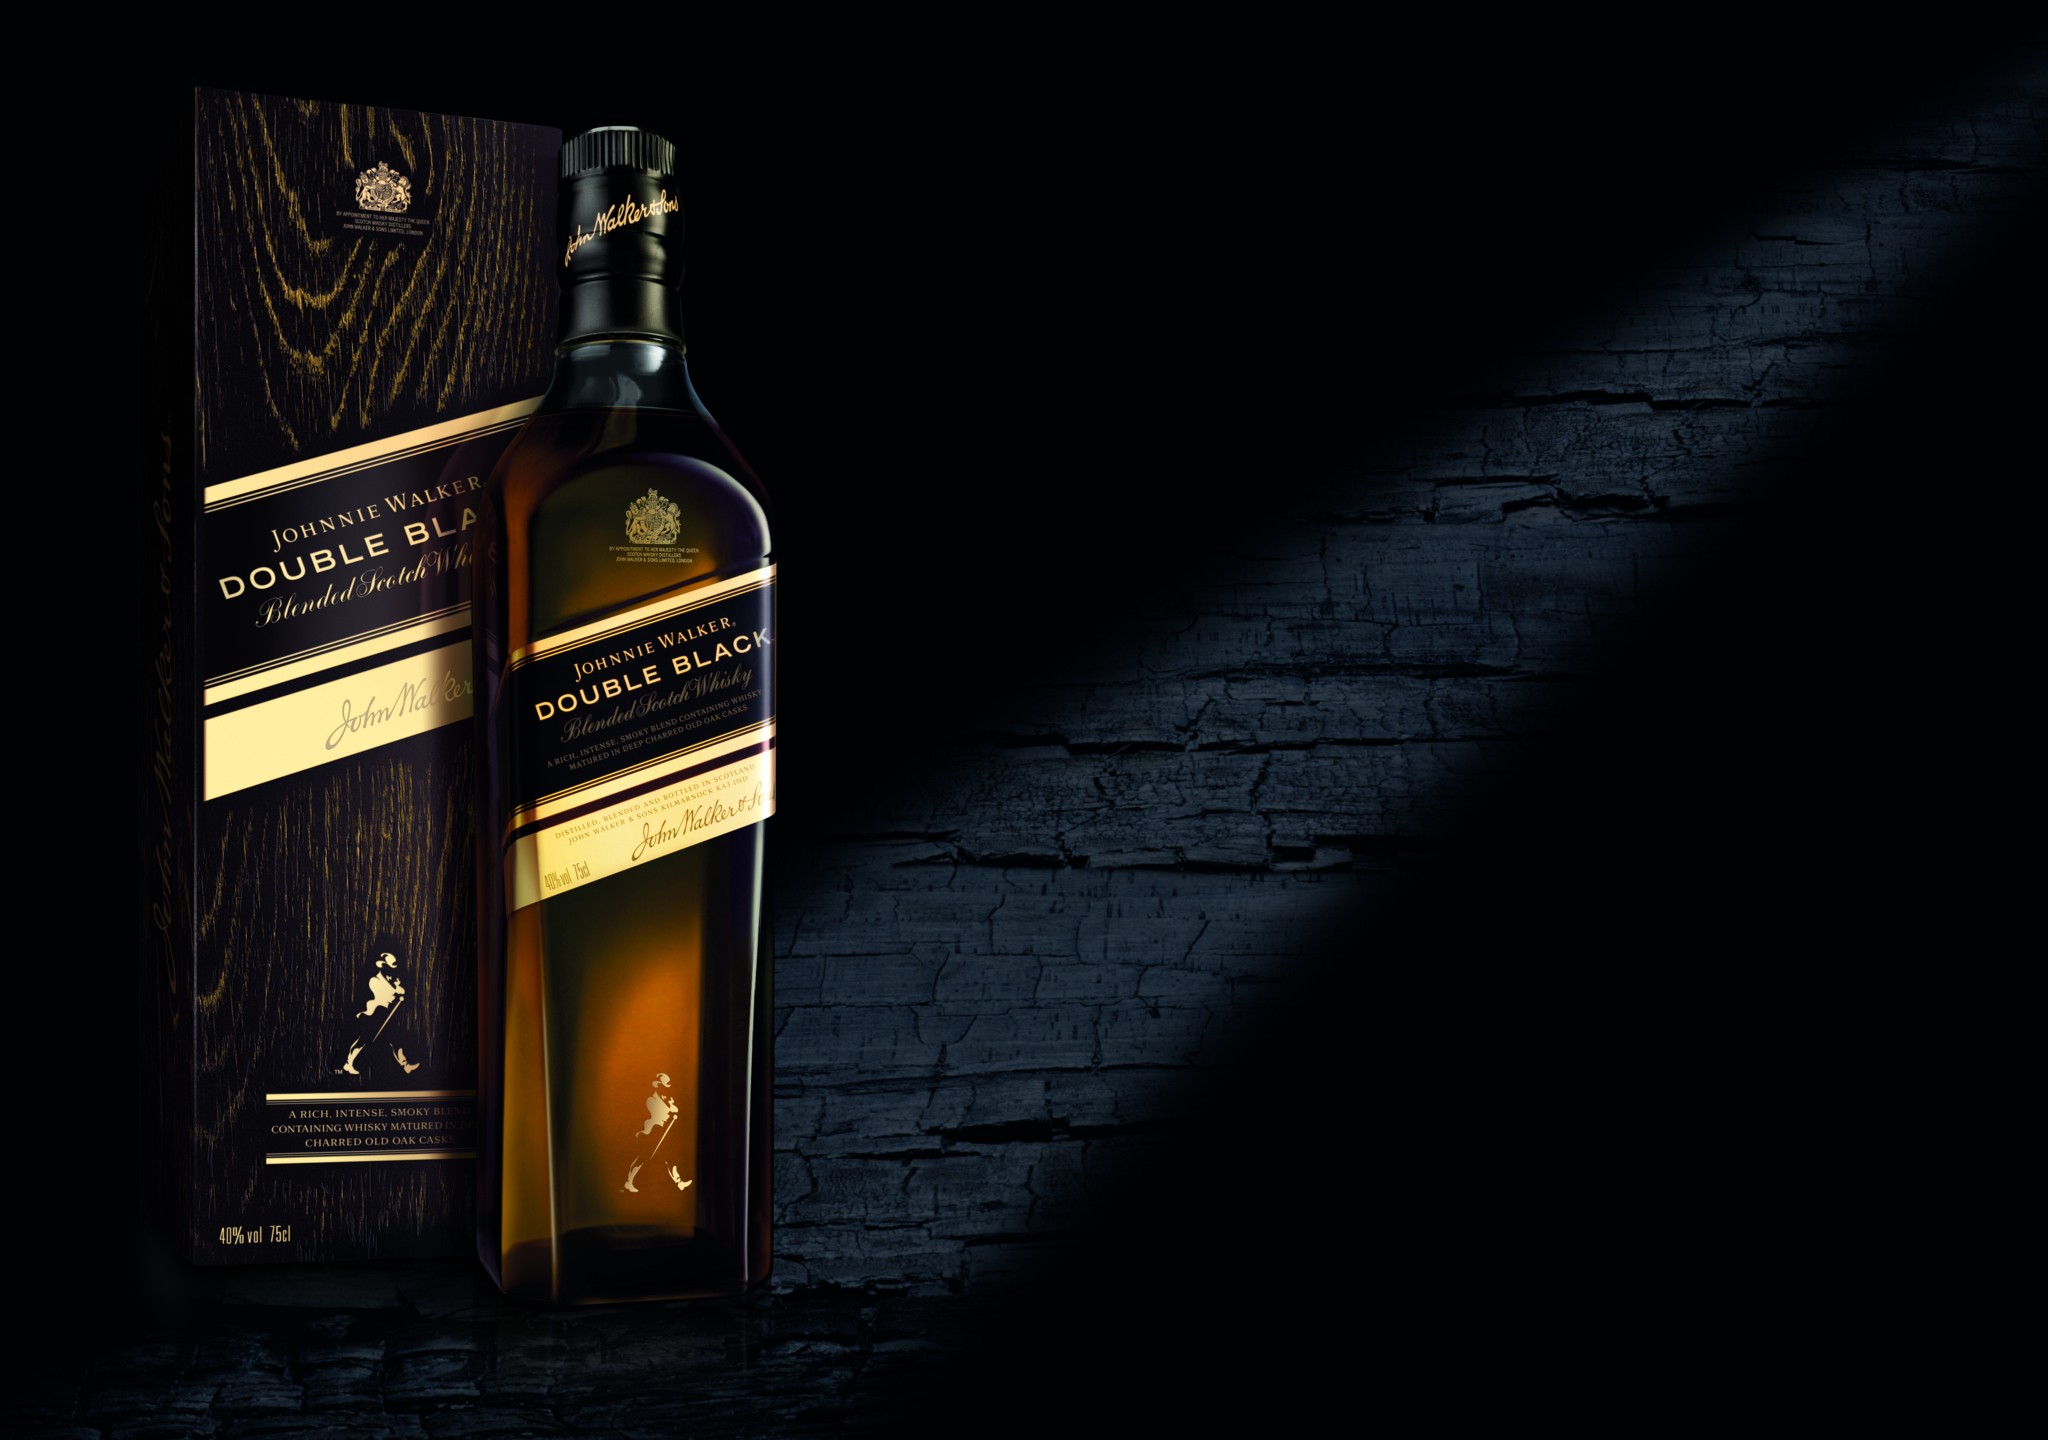 Bottles Alcohol Whisky Johnnie Walker Boxes Wall Lights Black Background 2048x1440